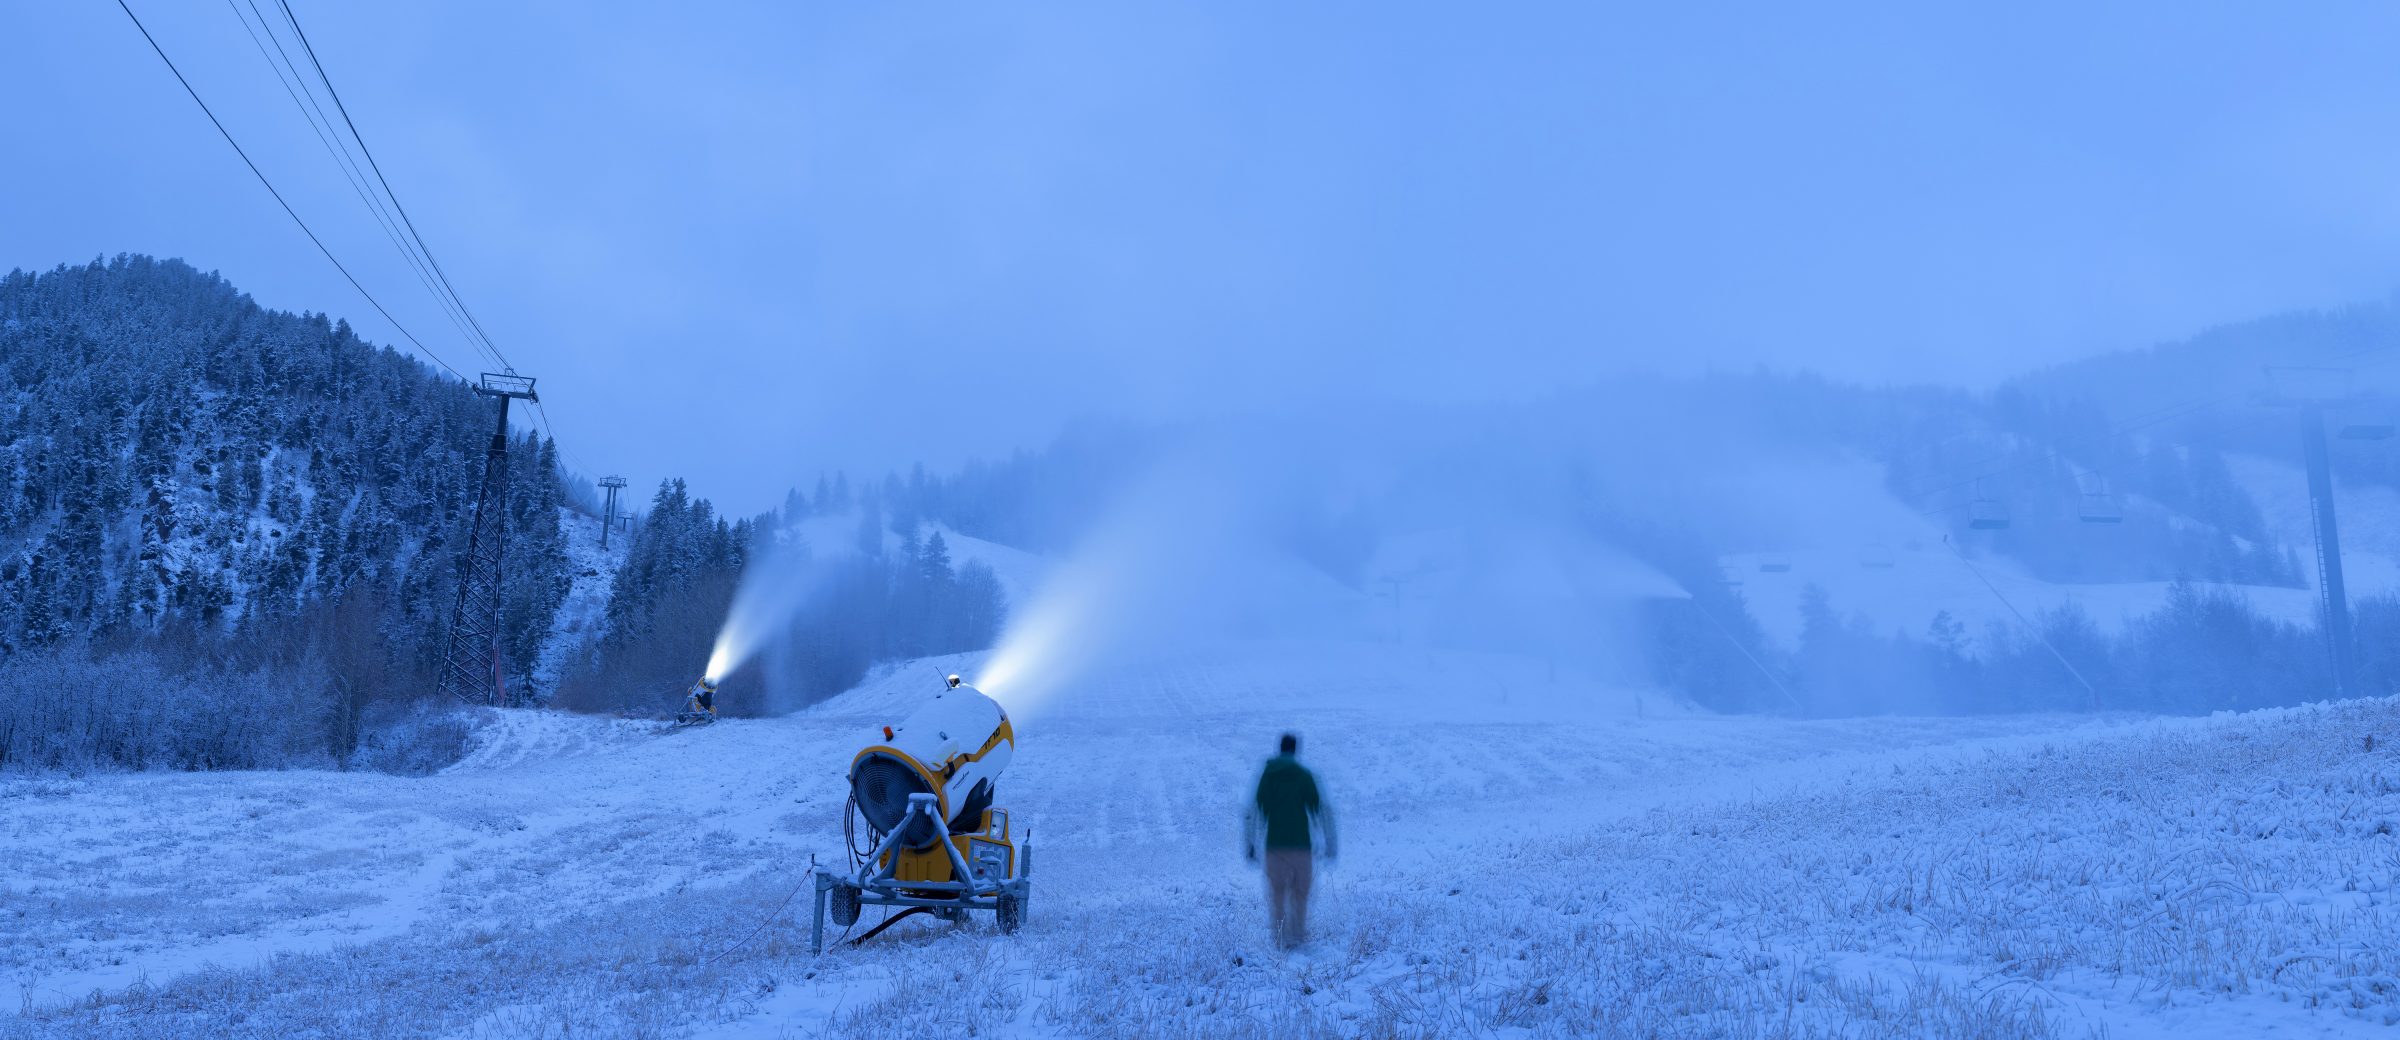 A lonely snowmaker working in Ajax. Photo: Dan Bayer. Aspen Skiing Company. Snowmaking Operations Underway at Aspen Snowmass for the 2018-19 Season